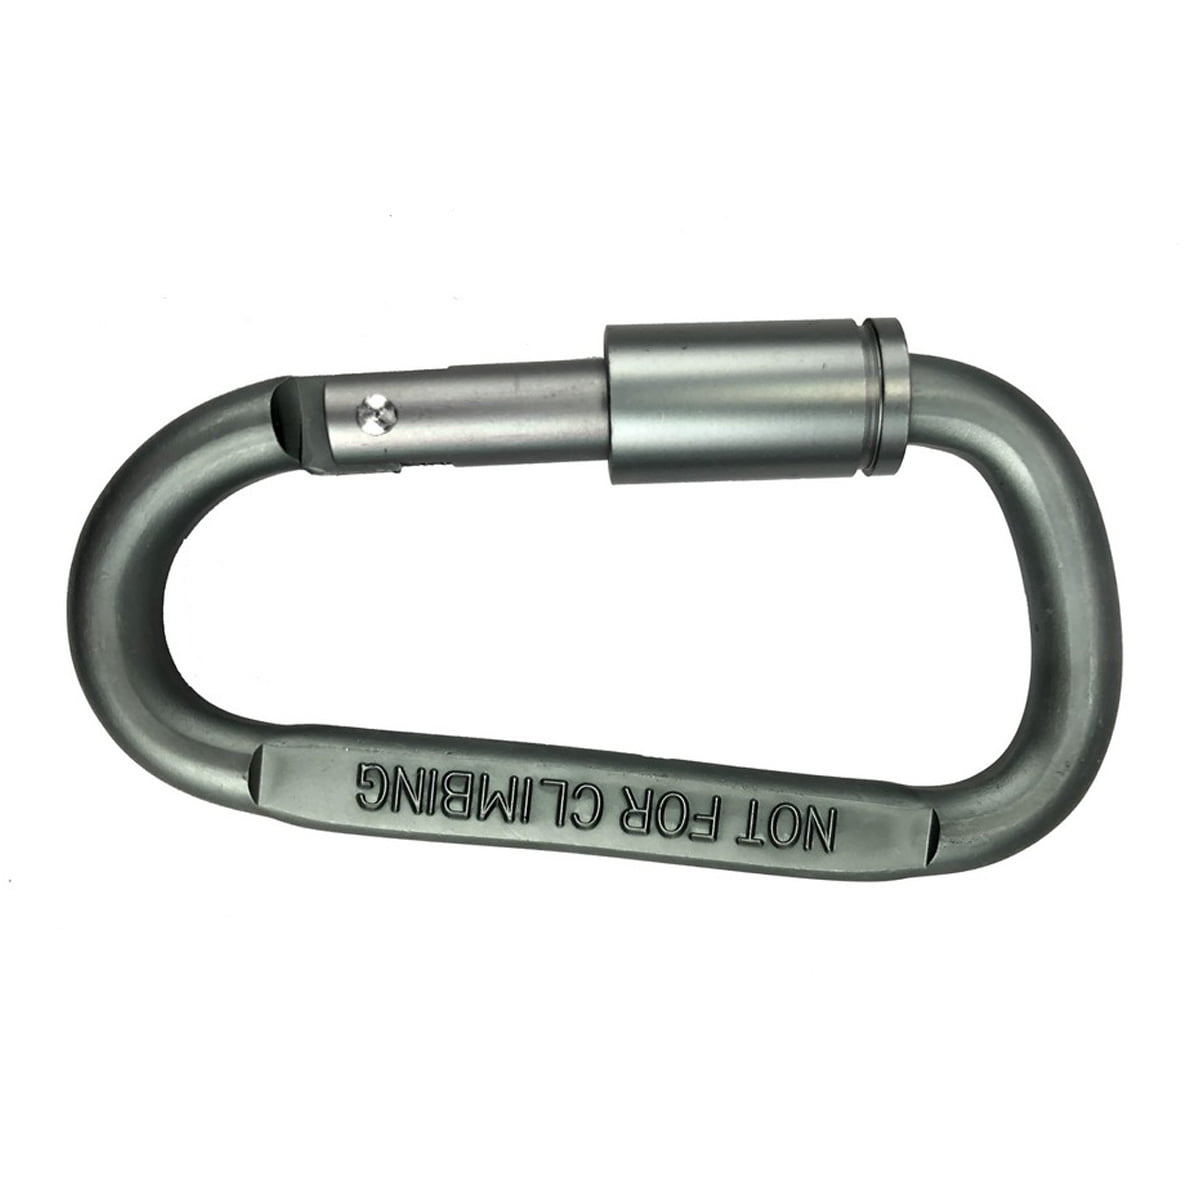 Details about   High Quality Shaped Aluminum Alloy Carabiner Hook Keychain Set New G9U9 